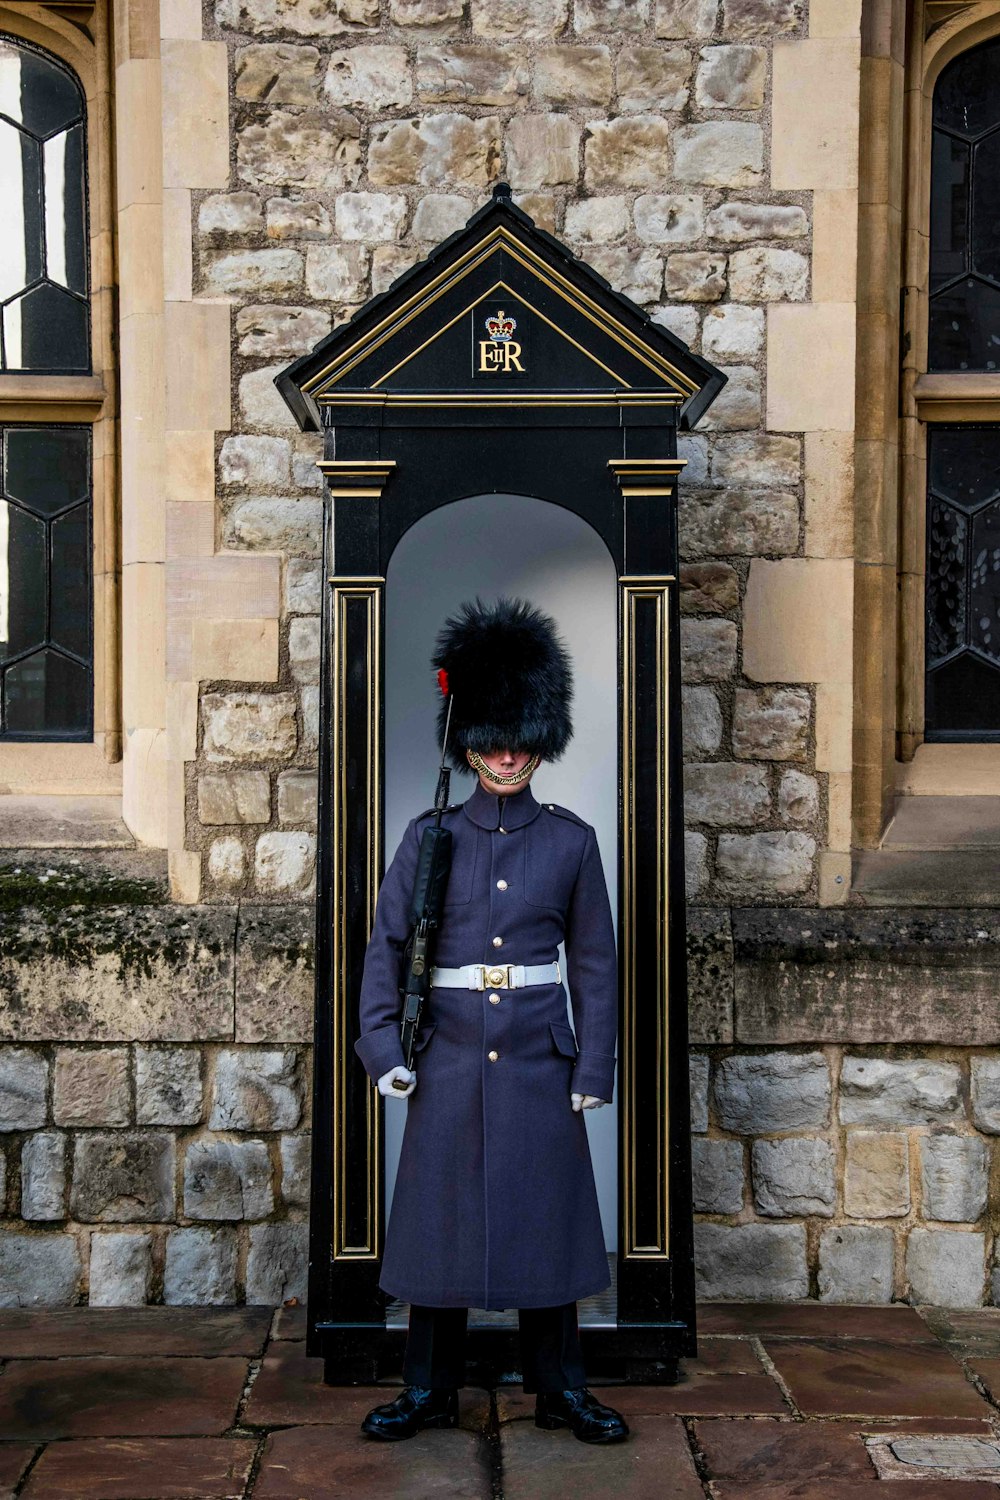 royal guard standing near booth